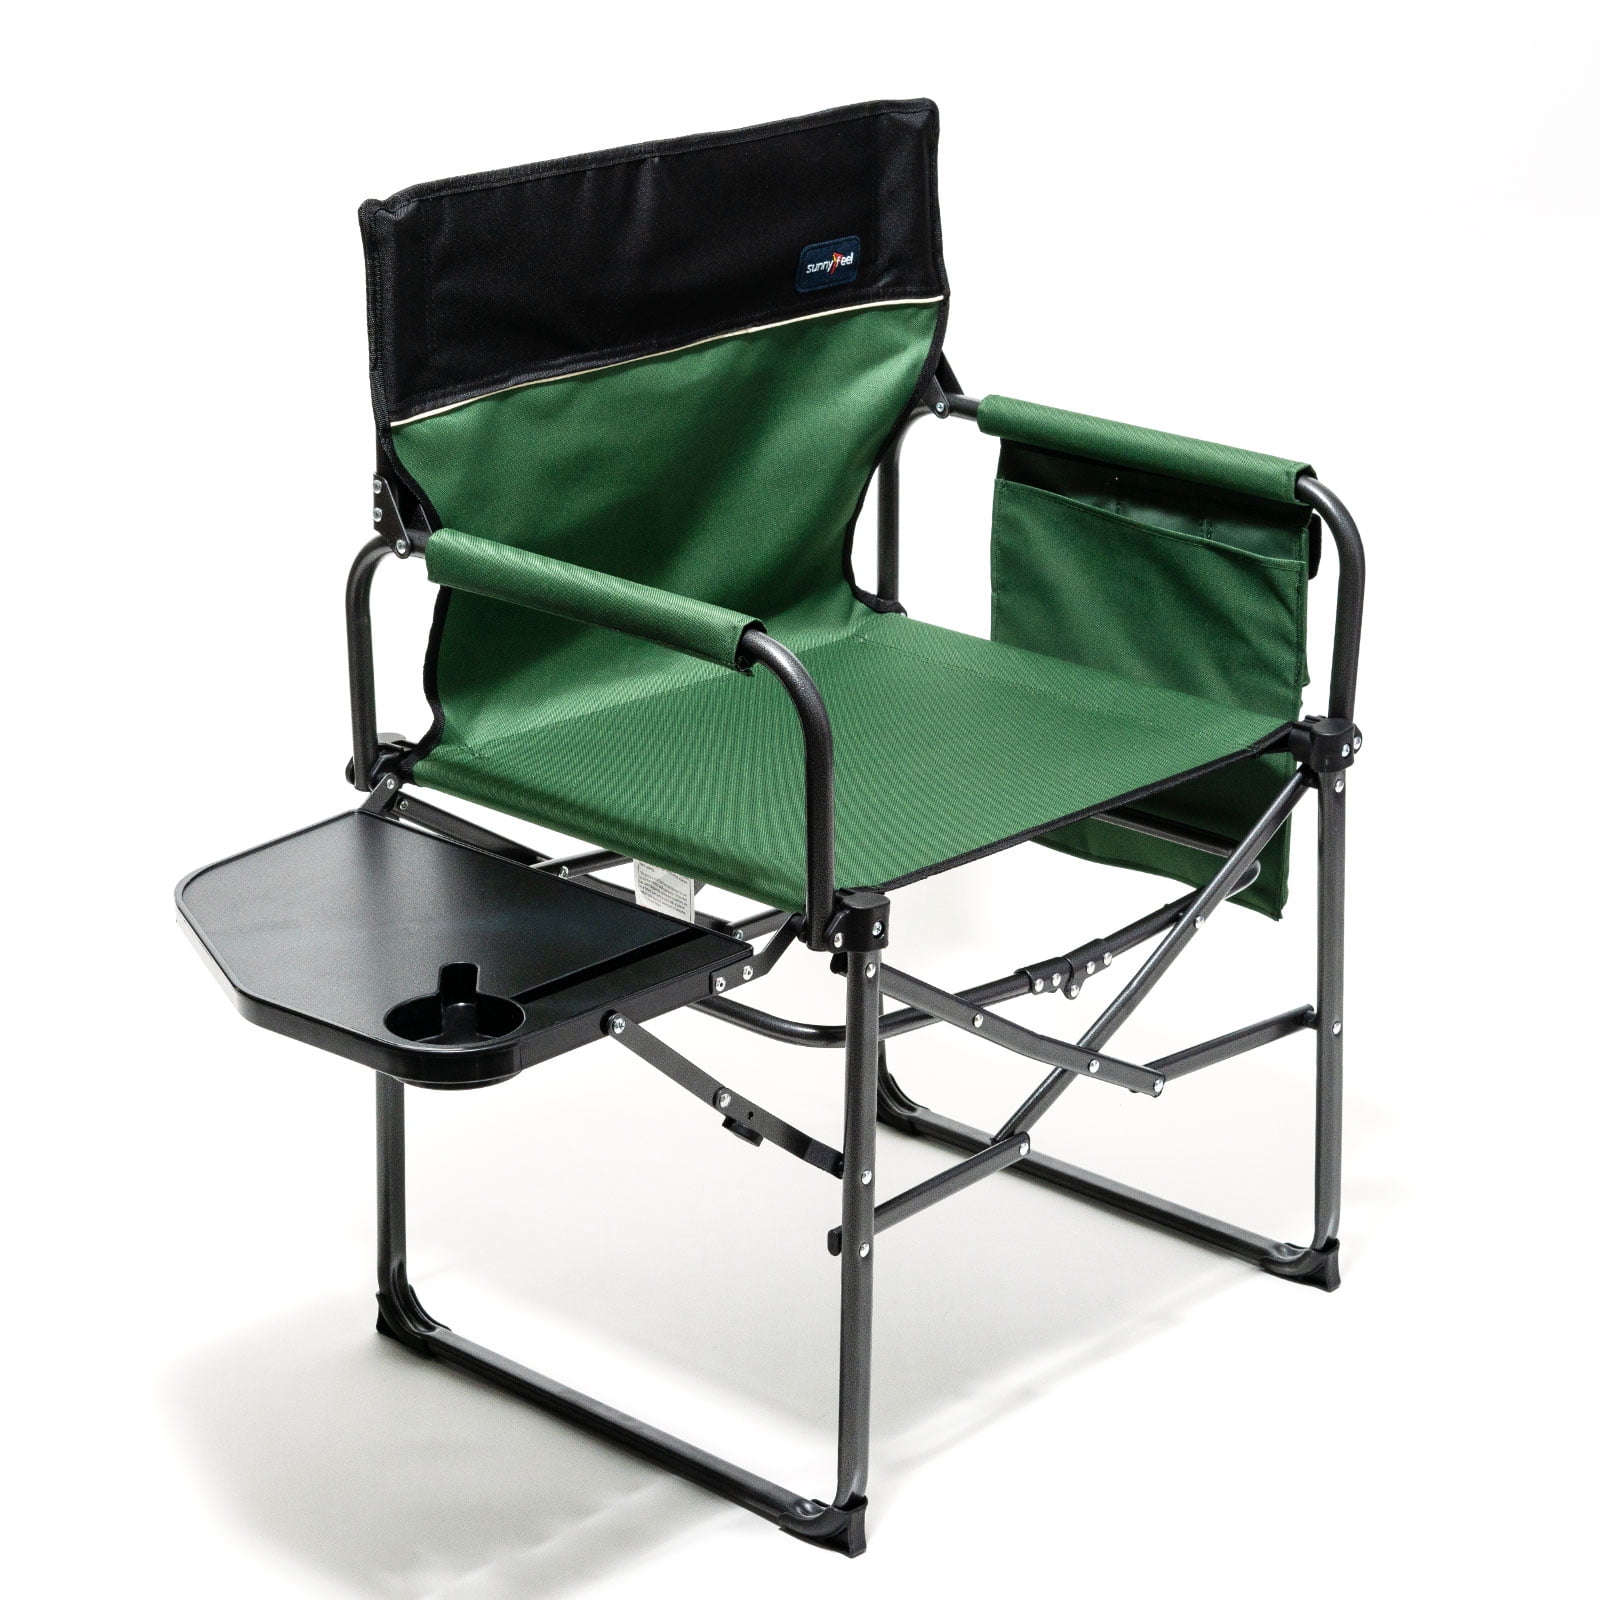 Heavy Duty Strong Folding Pocket Chair Outdoor Camping Fishing Fold Up Stool Bag 